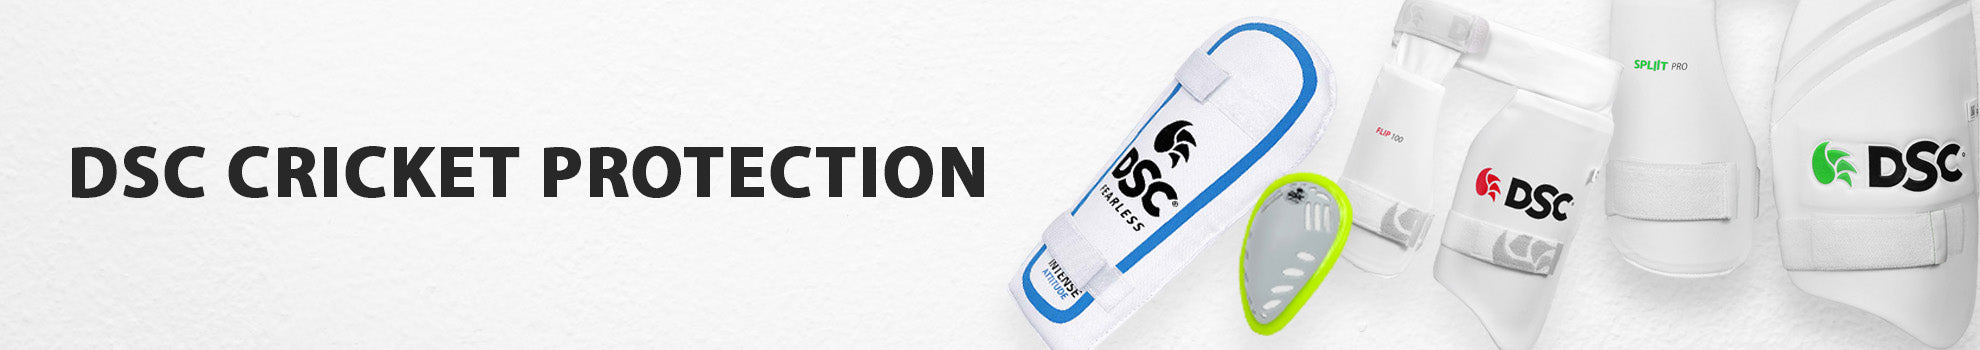 Buy DSC Protection from Stagsports Cricket Store